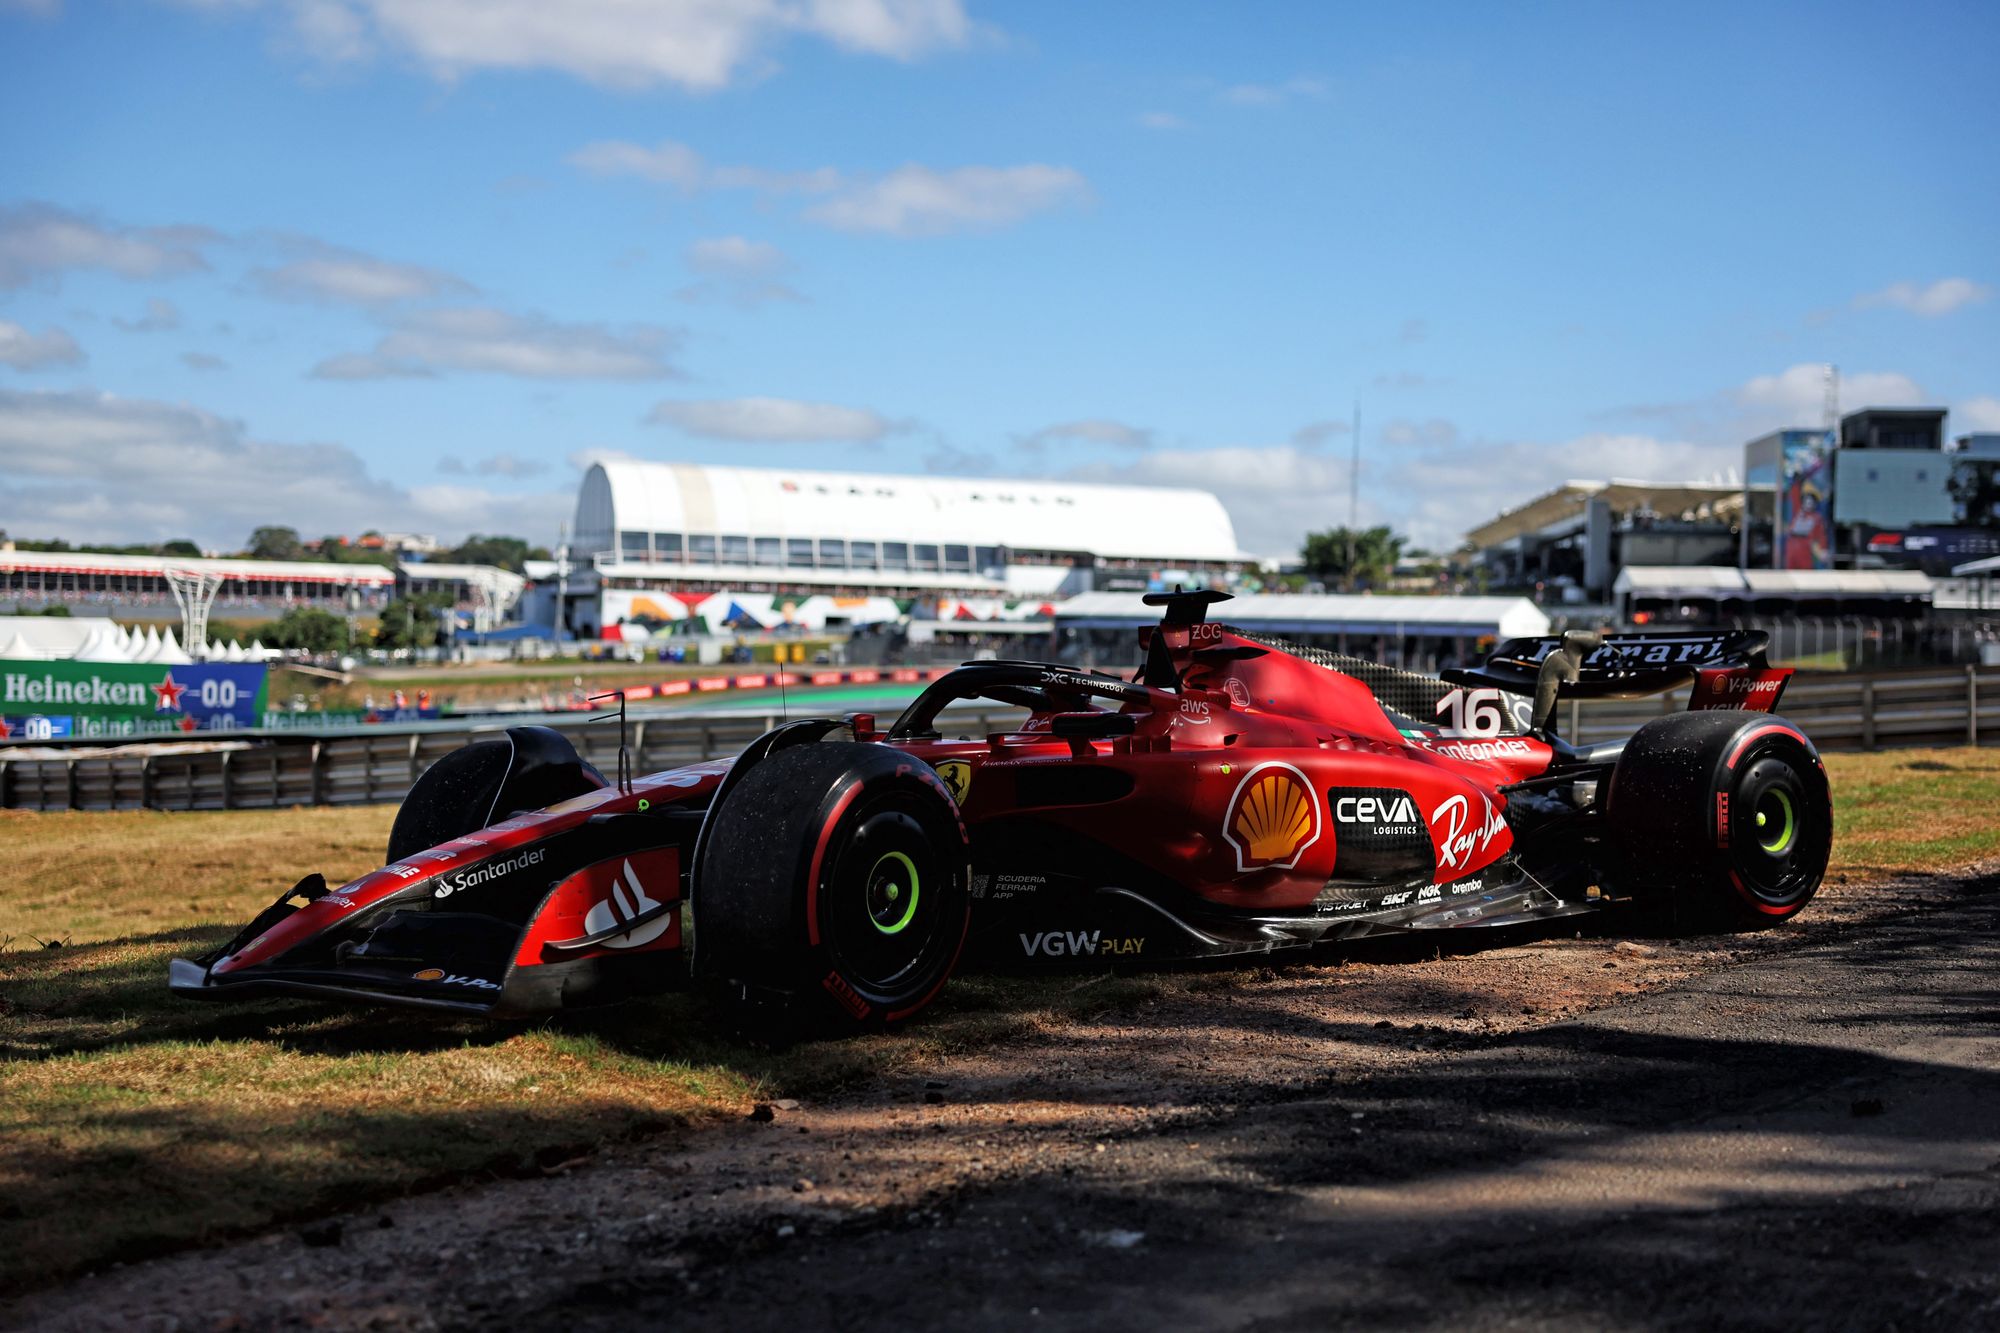 Leclerc's Brazil formation lap crash caused by electronics issue